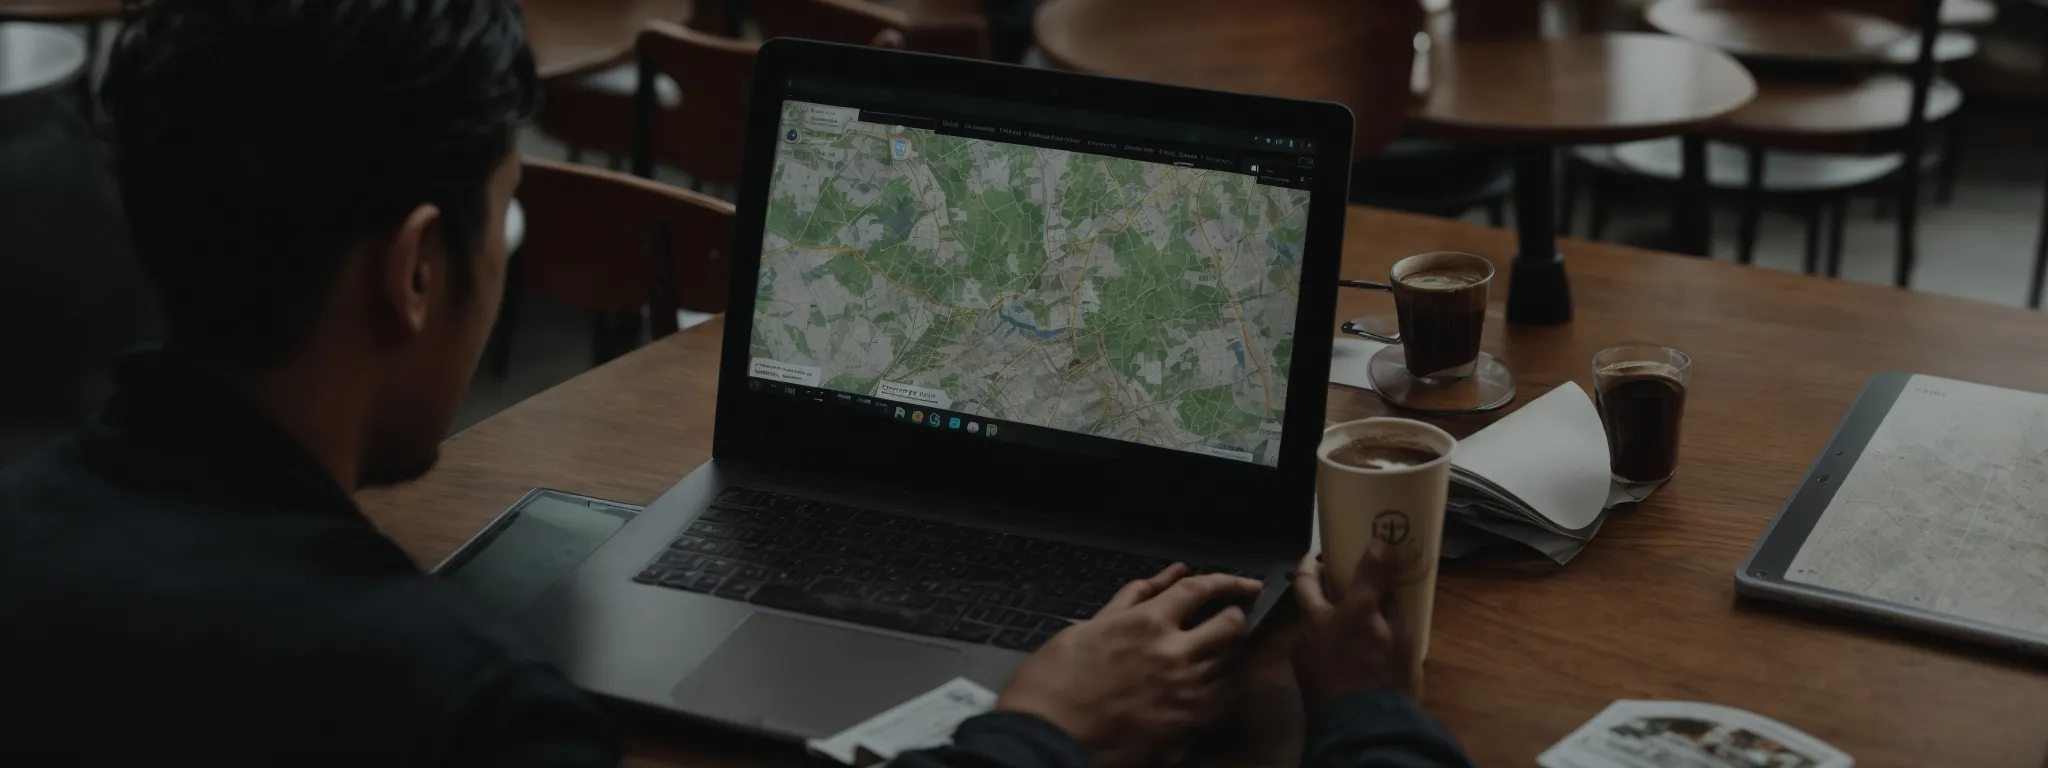 a person sitting at a cafe with a laptop, a coffee cup nearby while browsing a map on the screen.